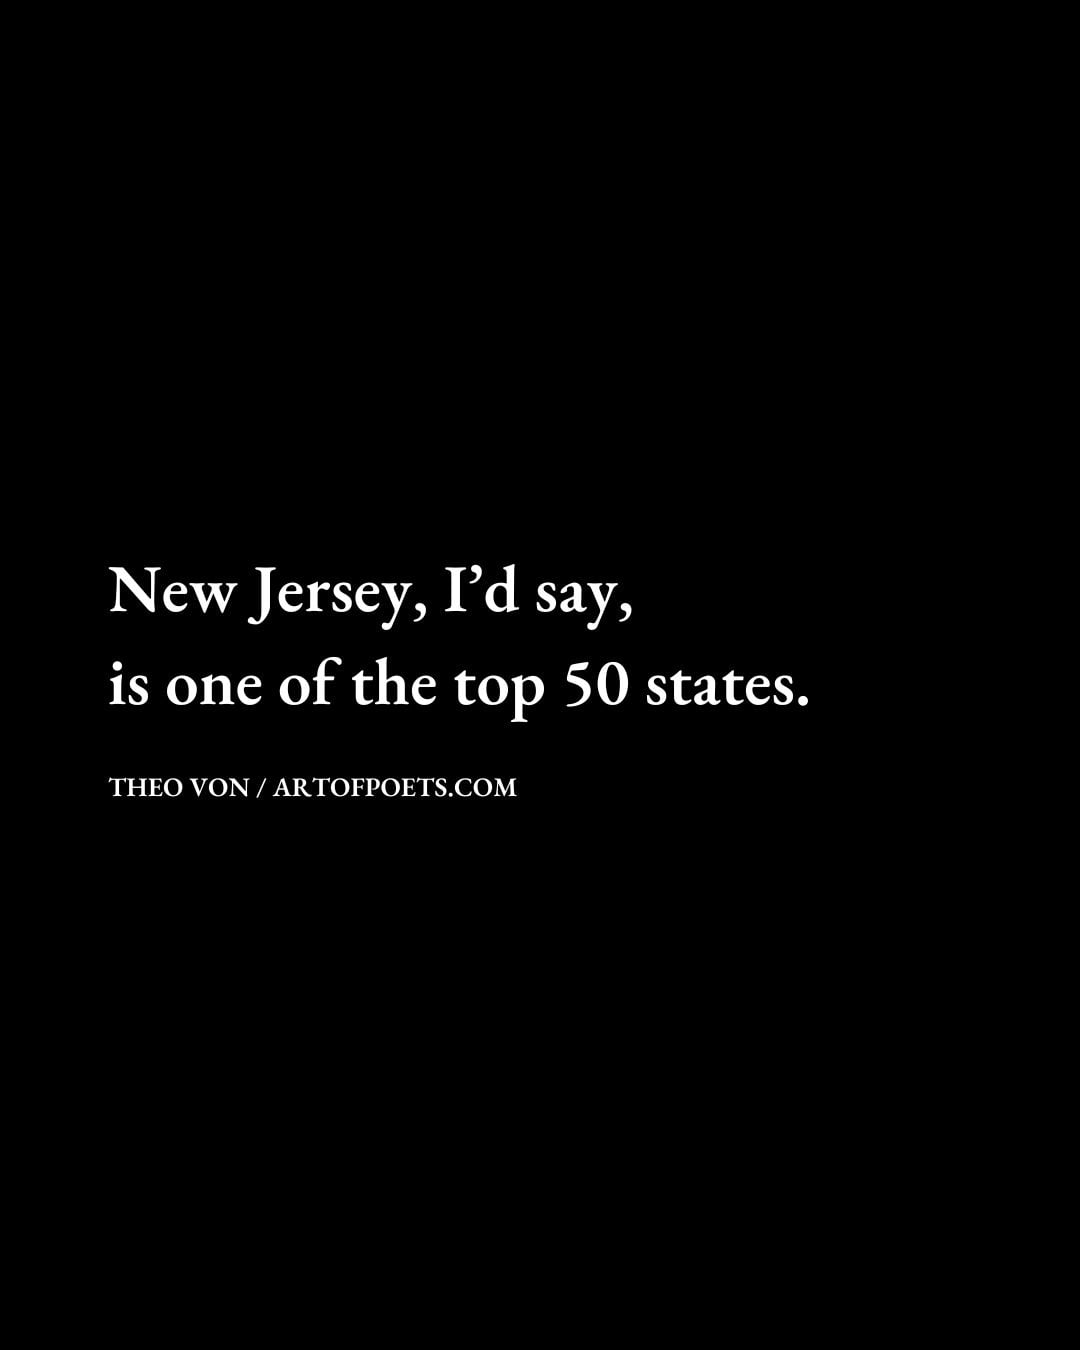 New Jersey Id say is one of the top 50 states